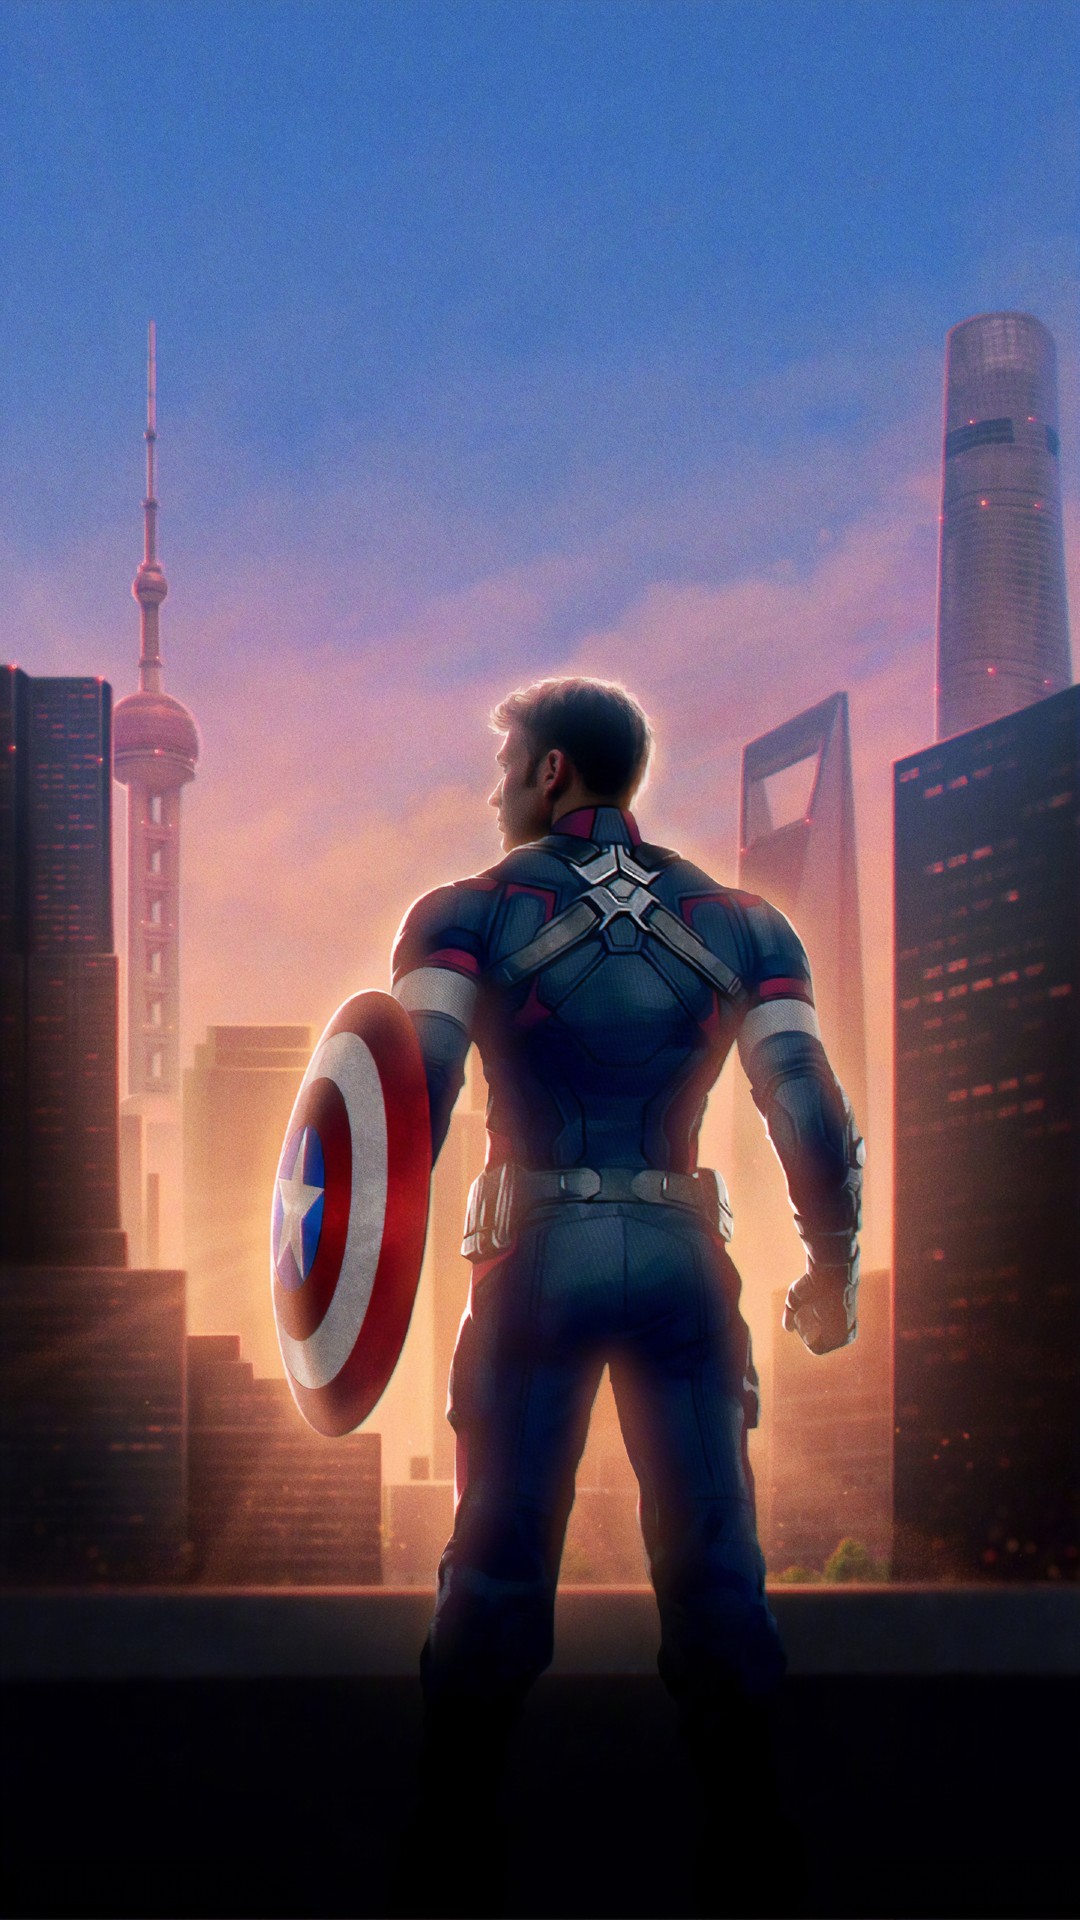 Captain America Avengers Endgame Wallpaper For iPhone With high-resolution 1080X1920 pixel. You can use this wallpaper for your iPhone 5, 6, 7, 8, X, XS, XR backgrounds, Mobile Screensaver, or iPad Lock Screen